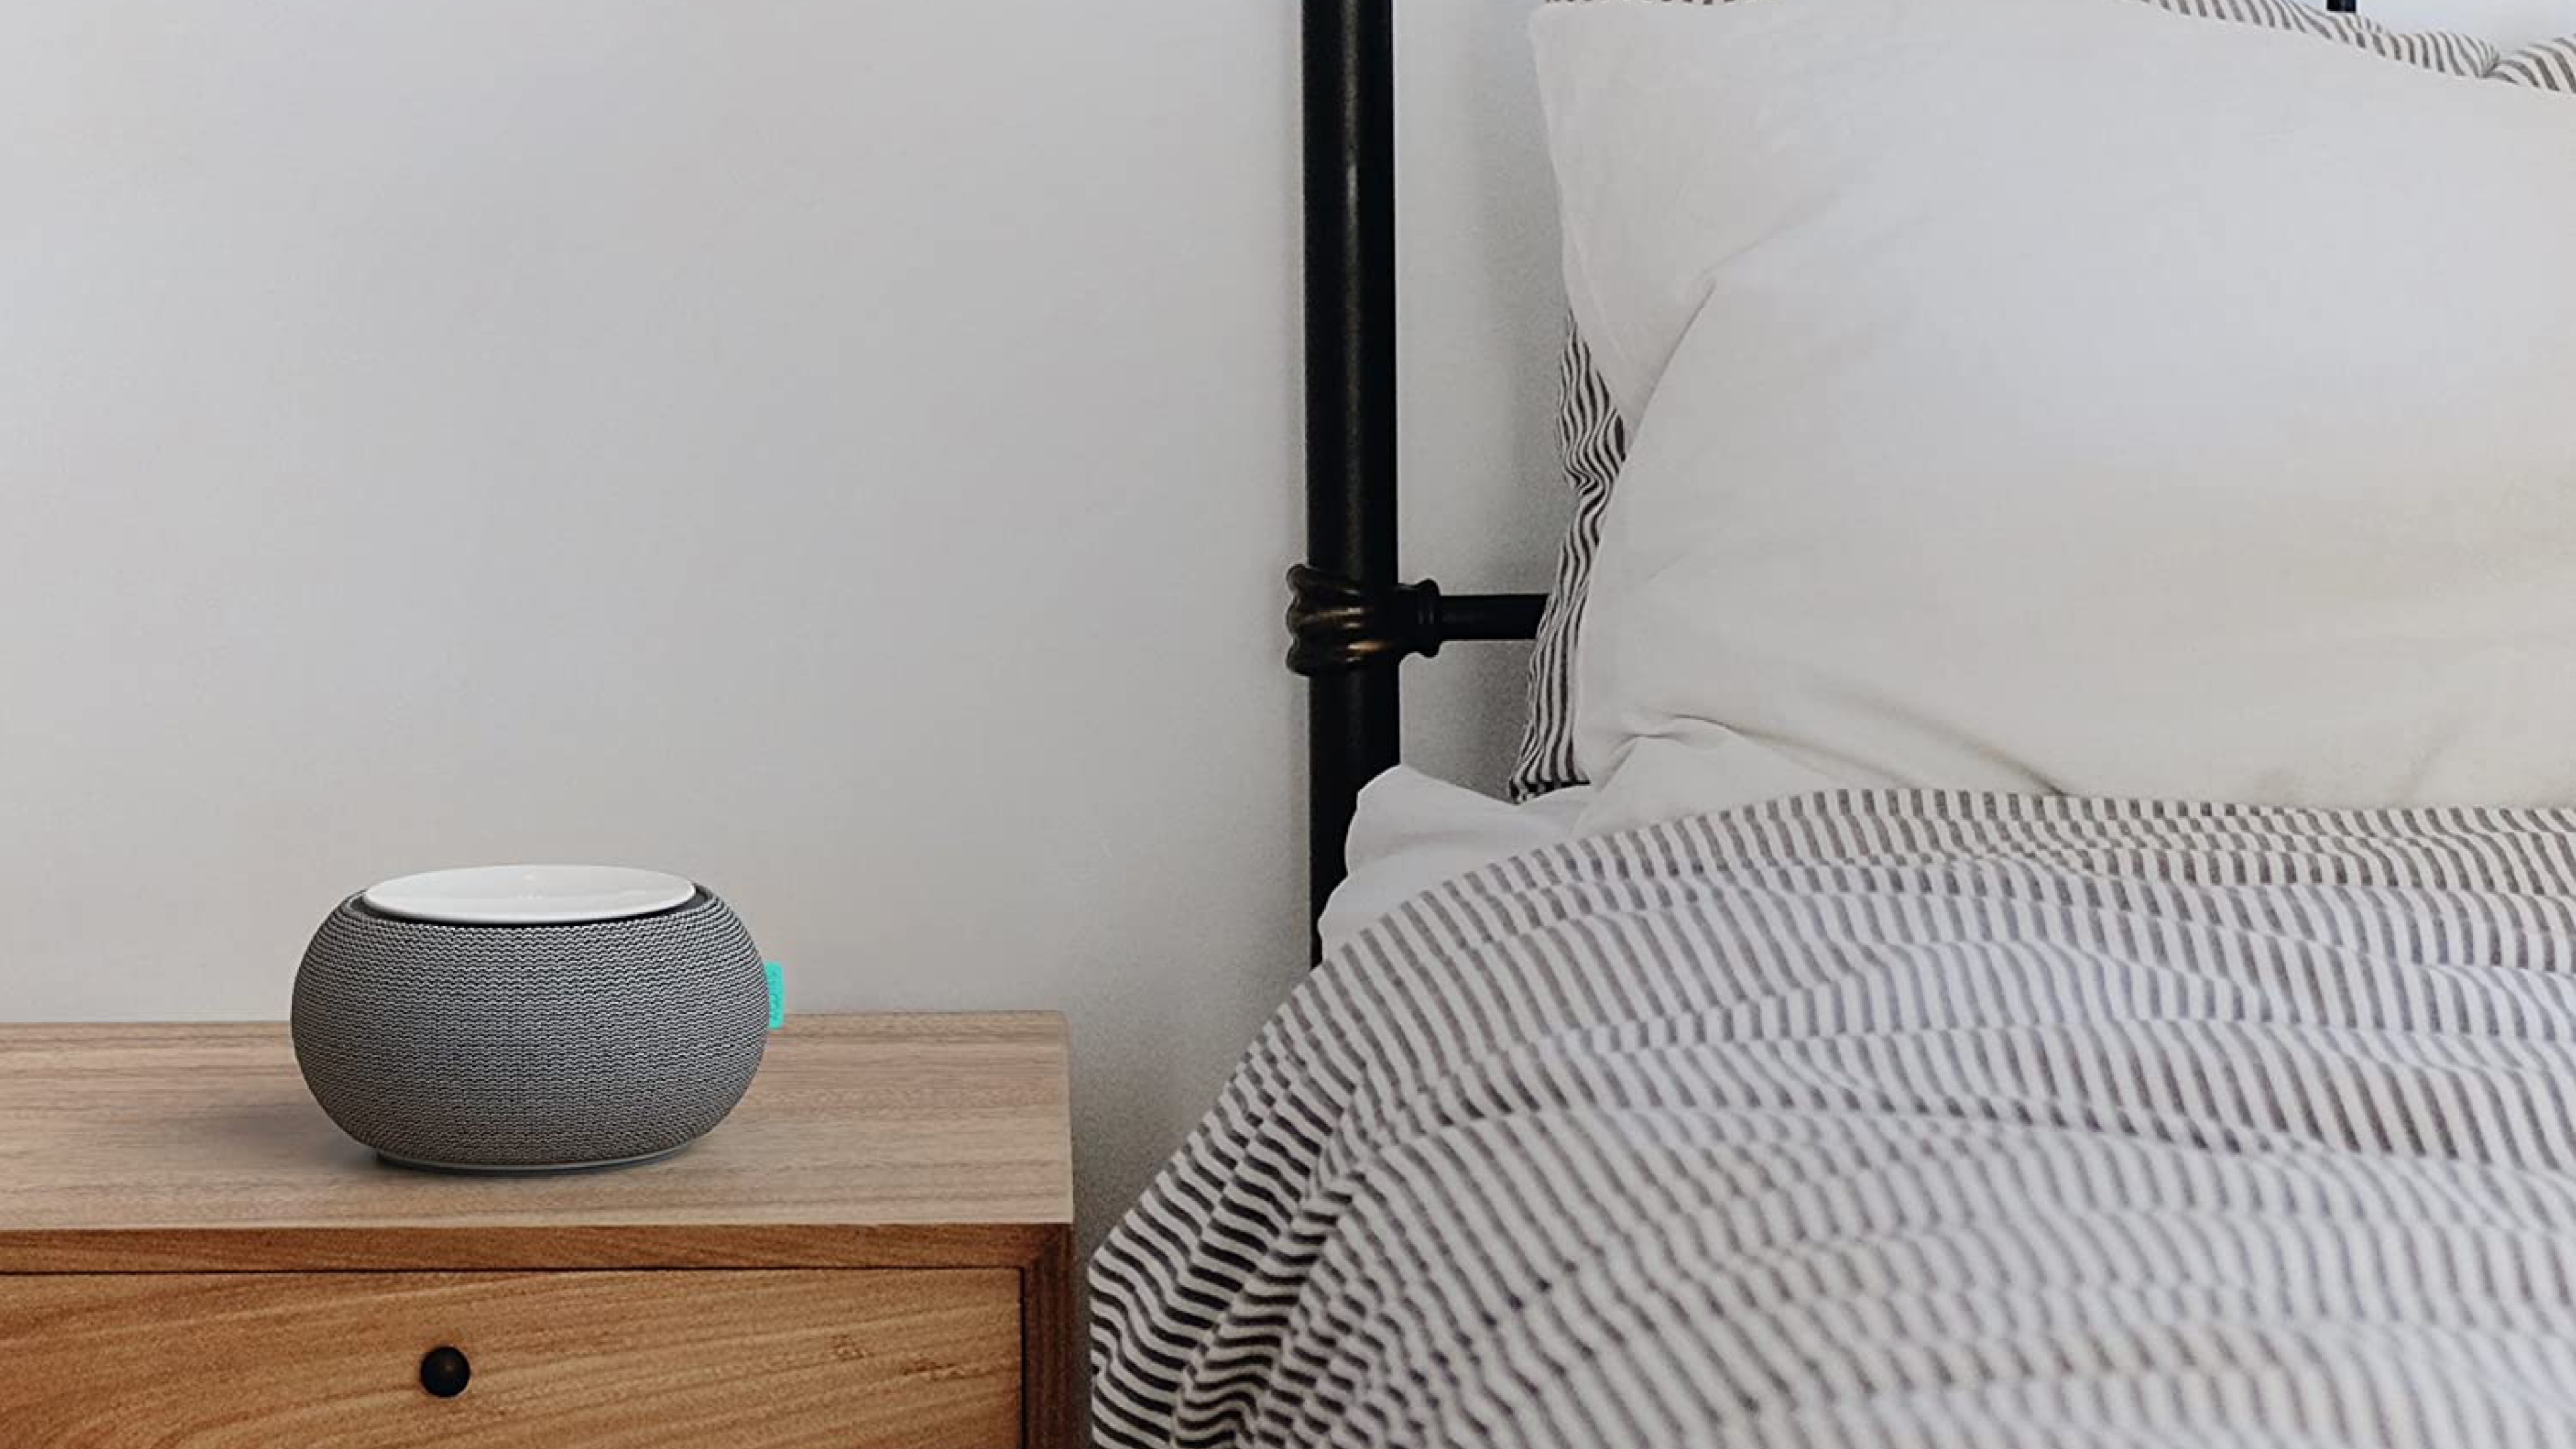 white noise machine to help block unwanted noise while sleeping